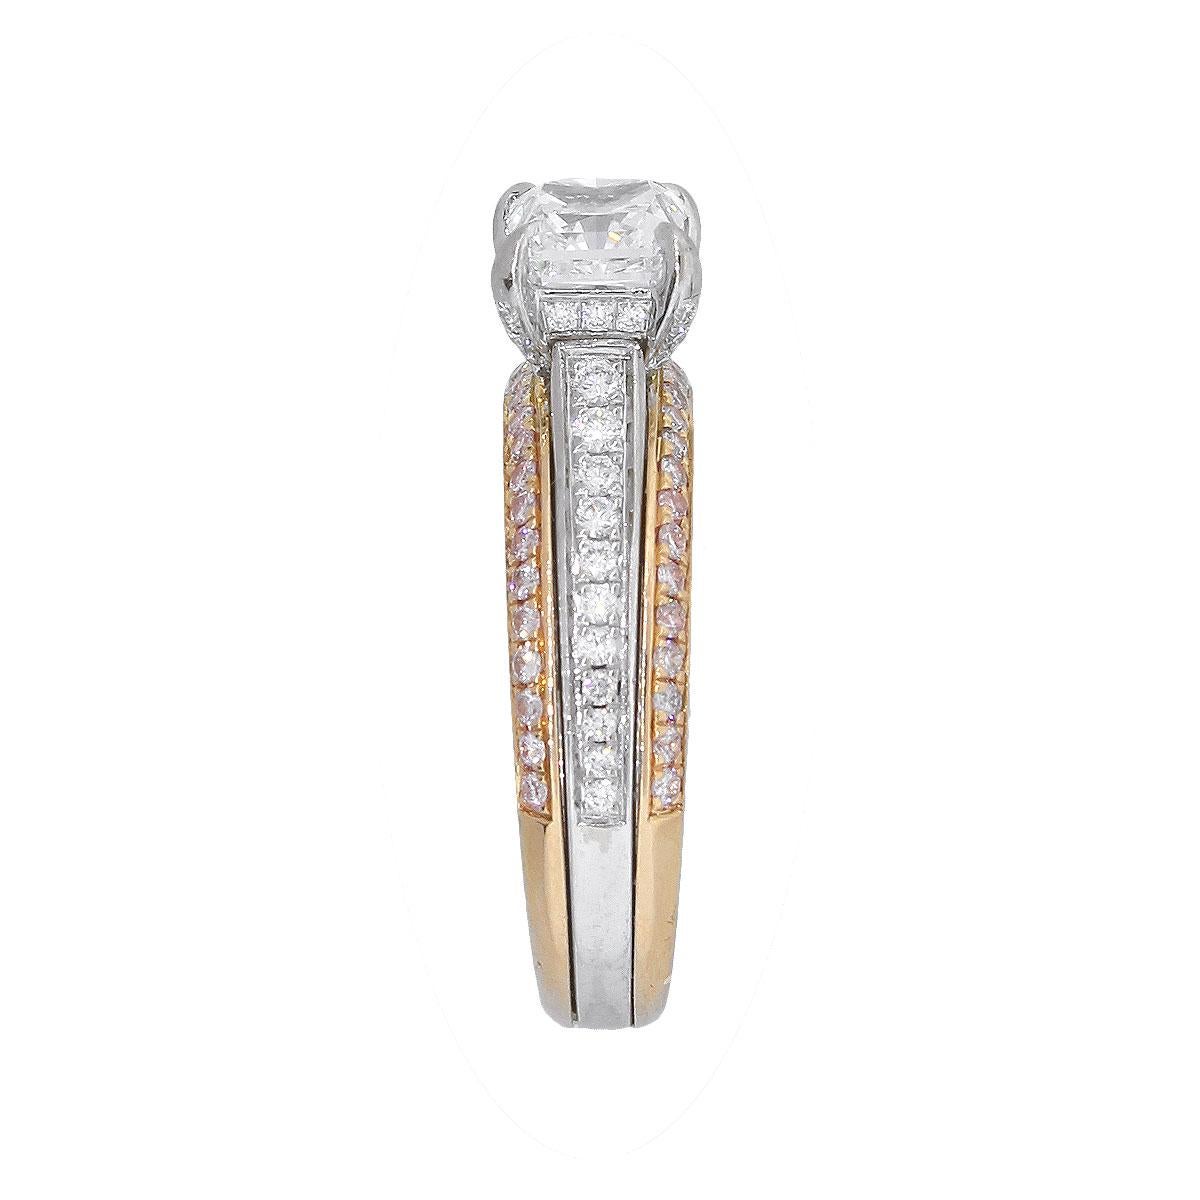 Material: 18k Rose gold and white gold
Center Diamond Details: GIA certified 0.90 carat radiant cut diamond, F in color, VVS1 in clarity GIA# 3215345774
Accent Diamond Details: Approximately 0.23ctw of round brilliant diamonds and 0.25ctw of pink